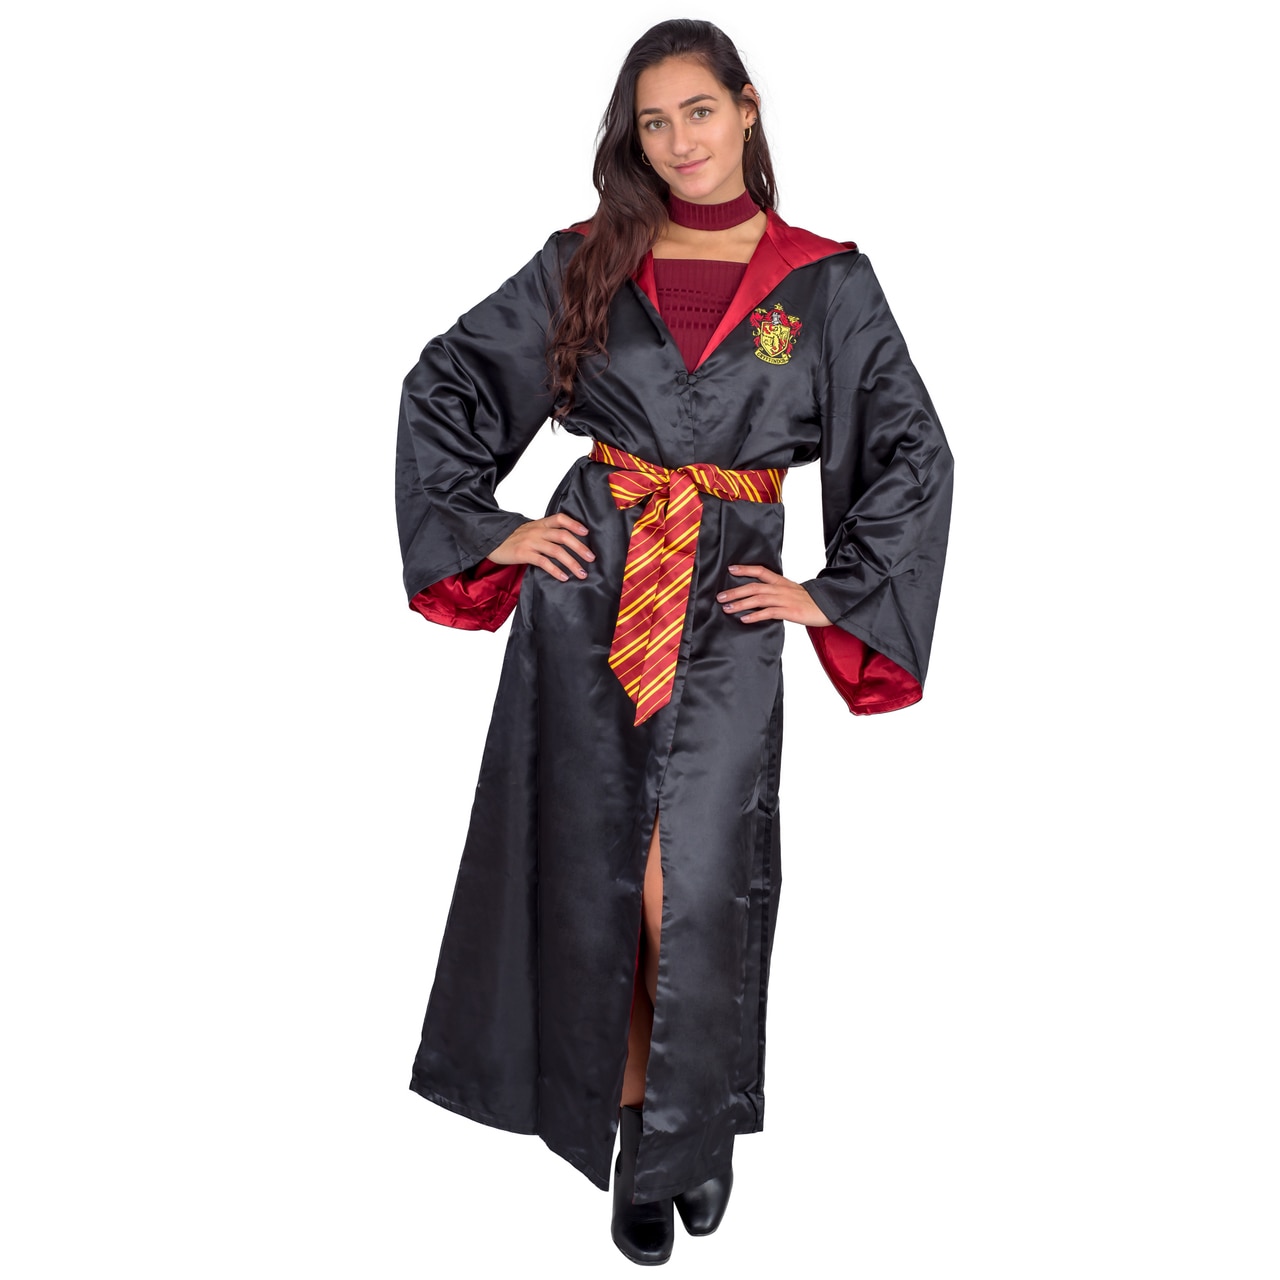 Image of Harry Potter Halloween Costume Robe with Belt and Hood